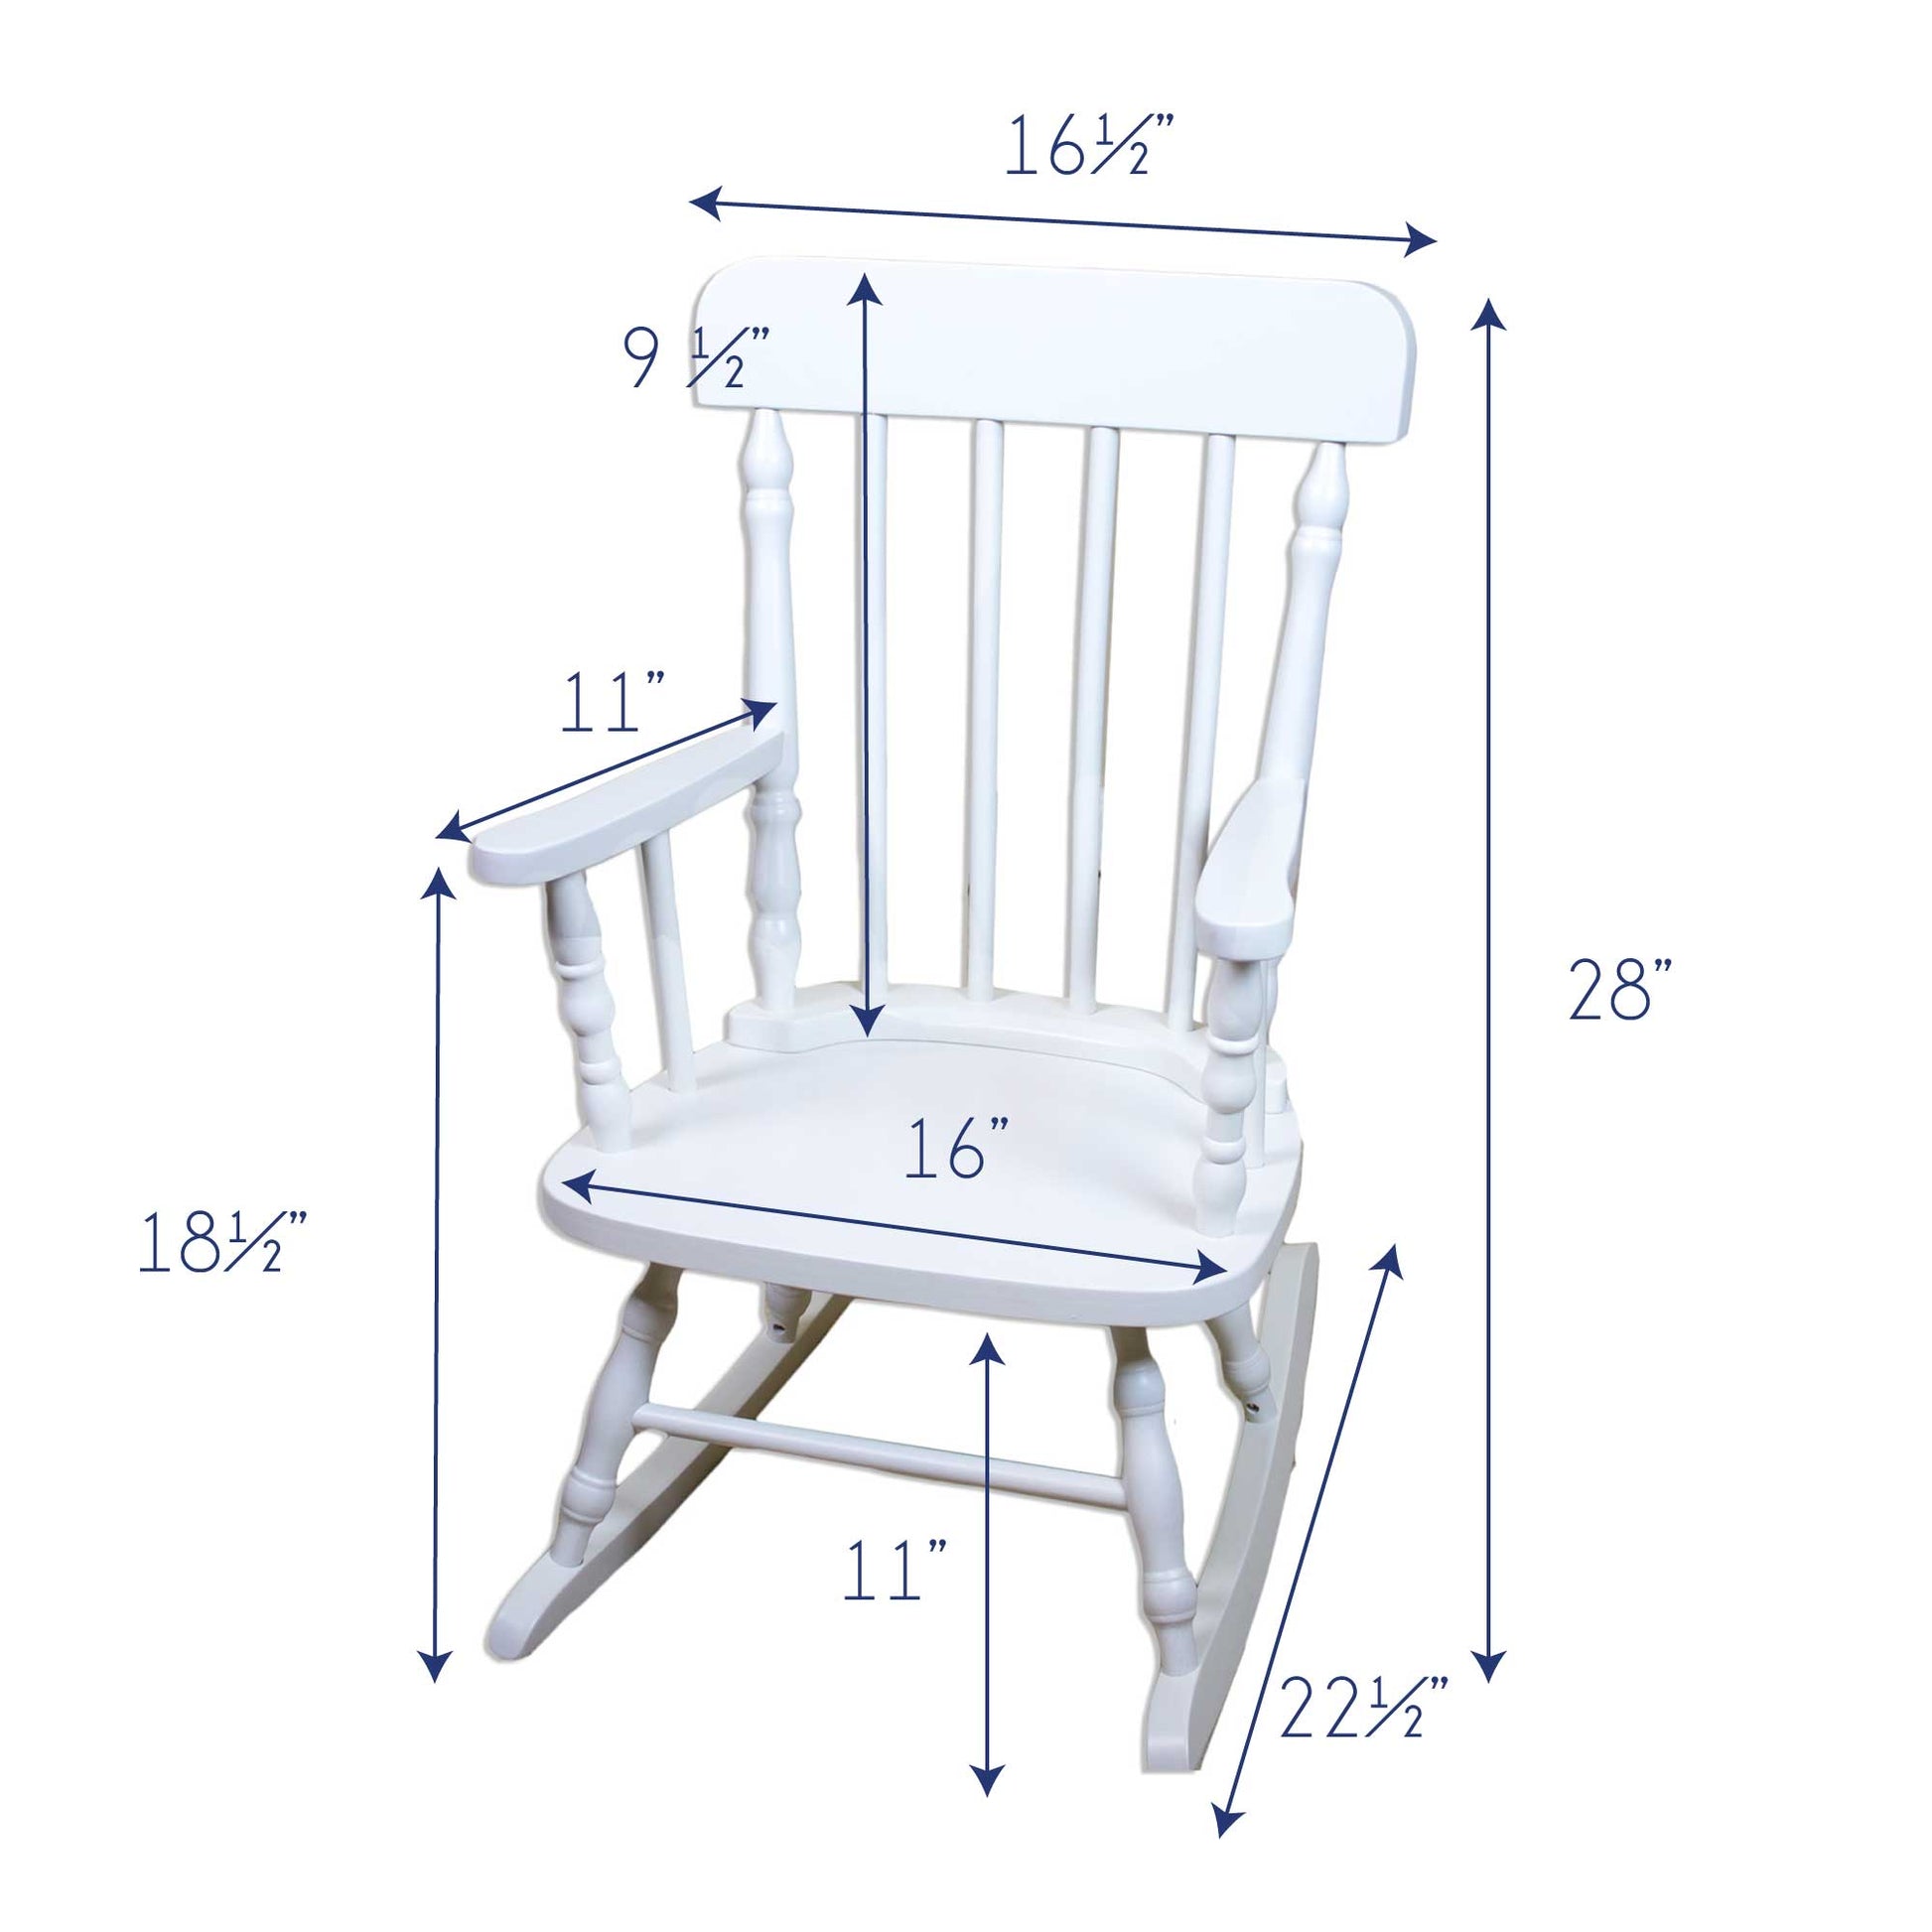 Construction White Personalized Wooden ,rocking chairs